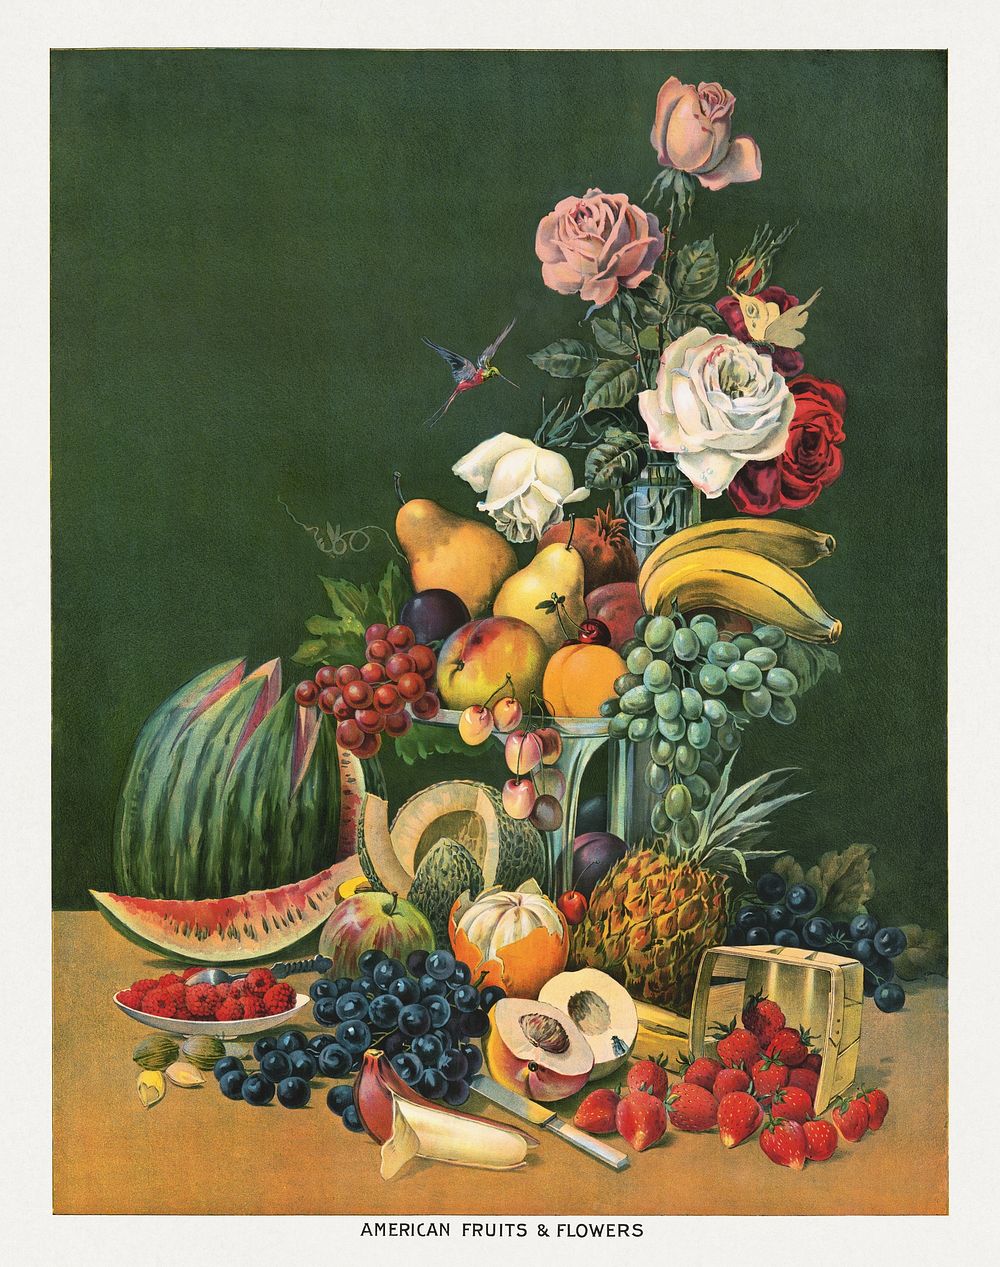 American fruits & flowers (1899) chromolithograph. Original public domain image from the Library of Congress. Digitally…